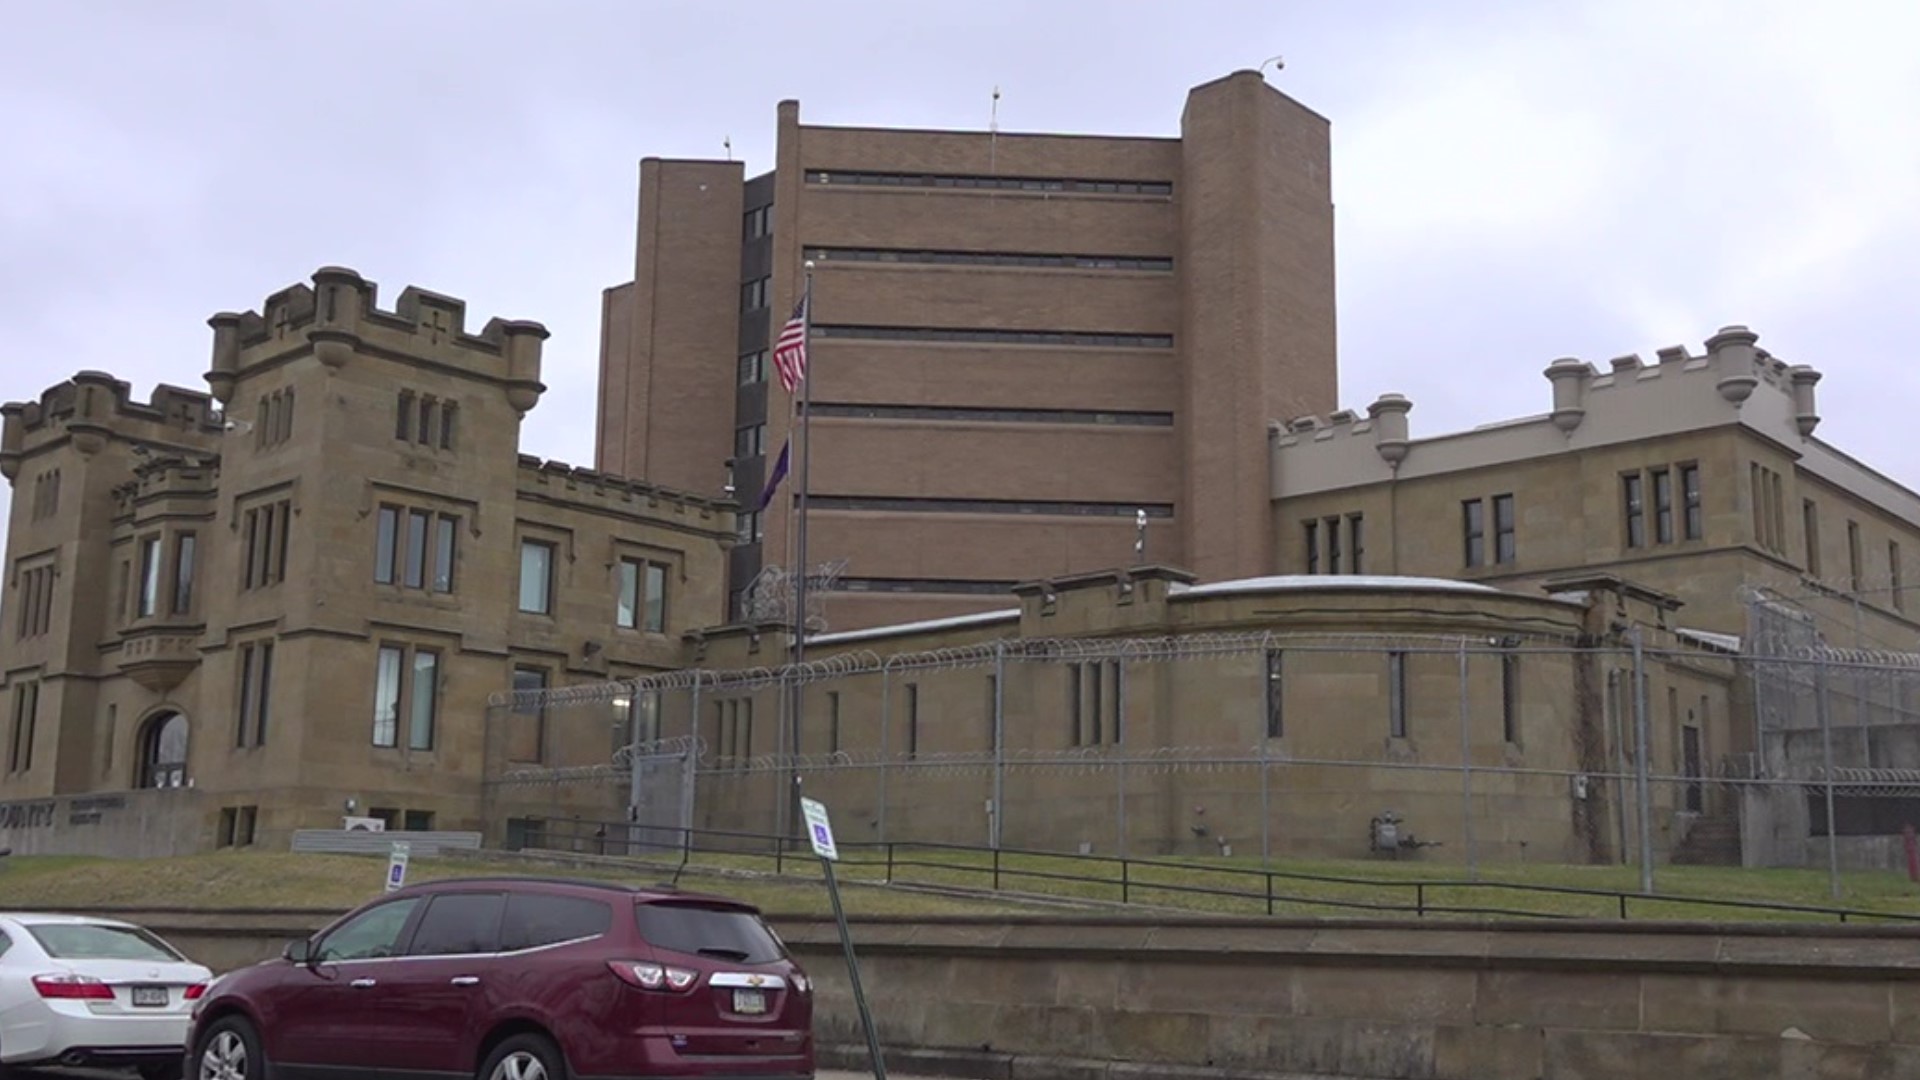 Authorities at the prison in Wilkes-Barre released the half-brother of a man scheduled to be freed on bail.